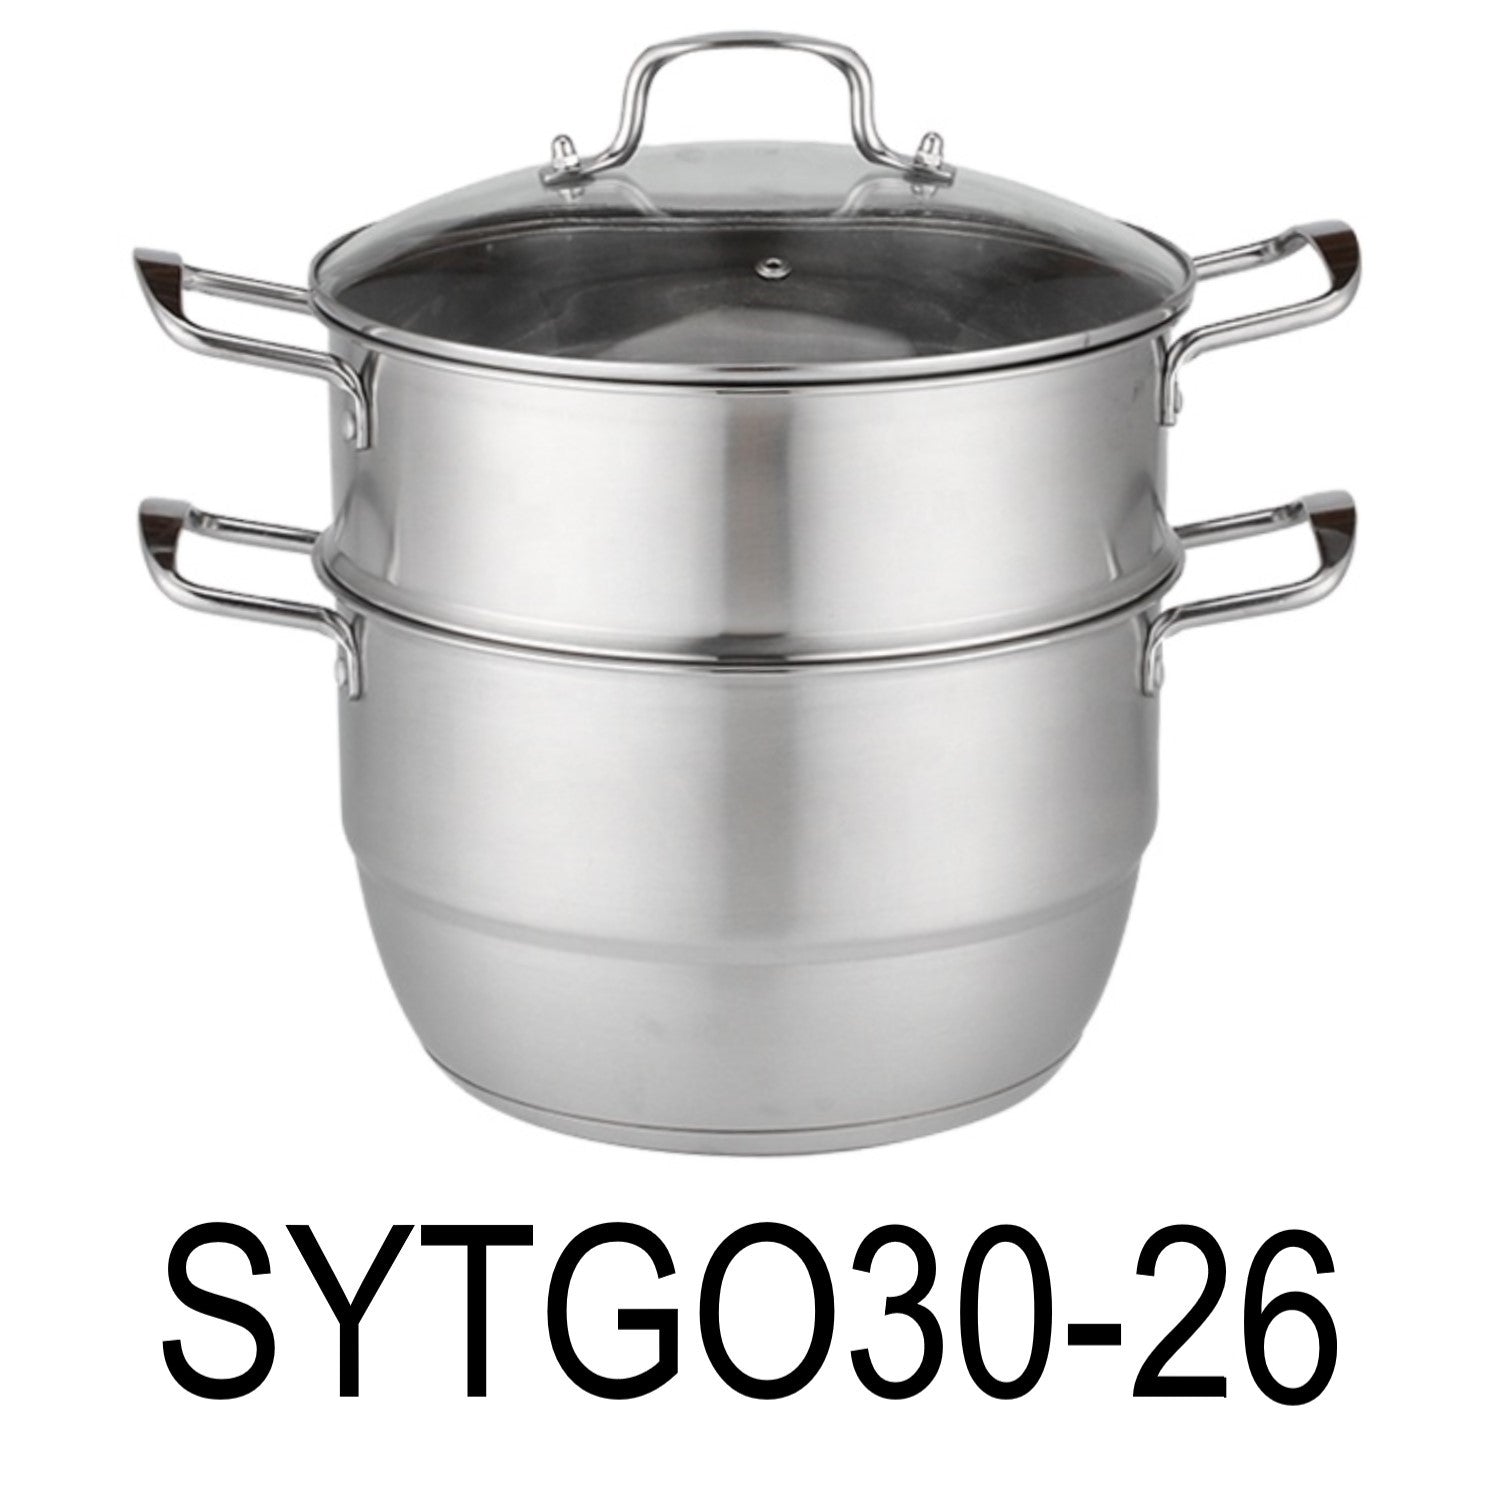 304 Stainless Steel Steamer 1 Layer Thickened Compound Bottom Soup